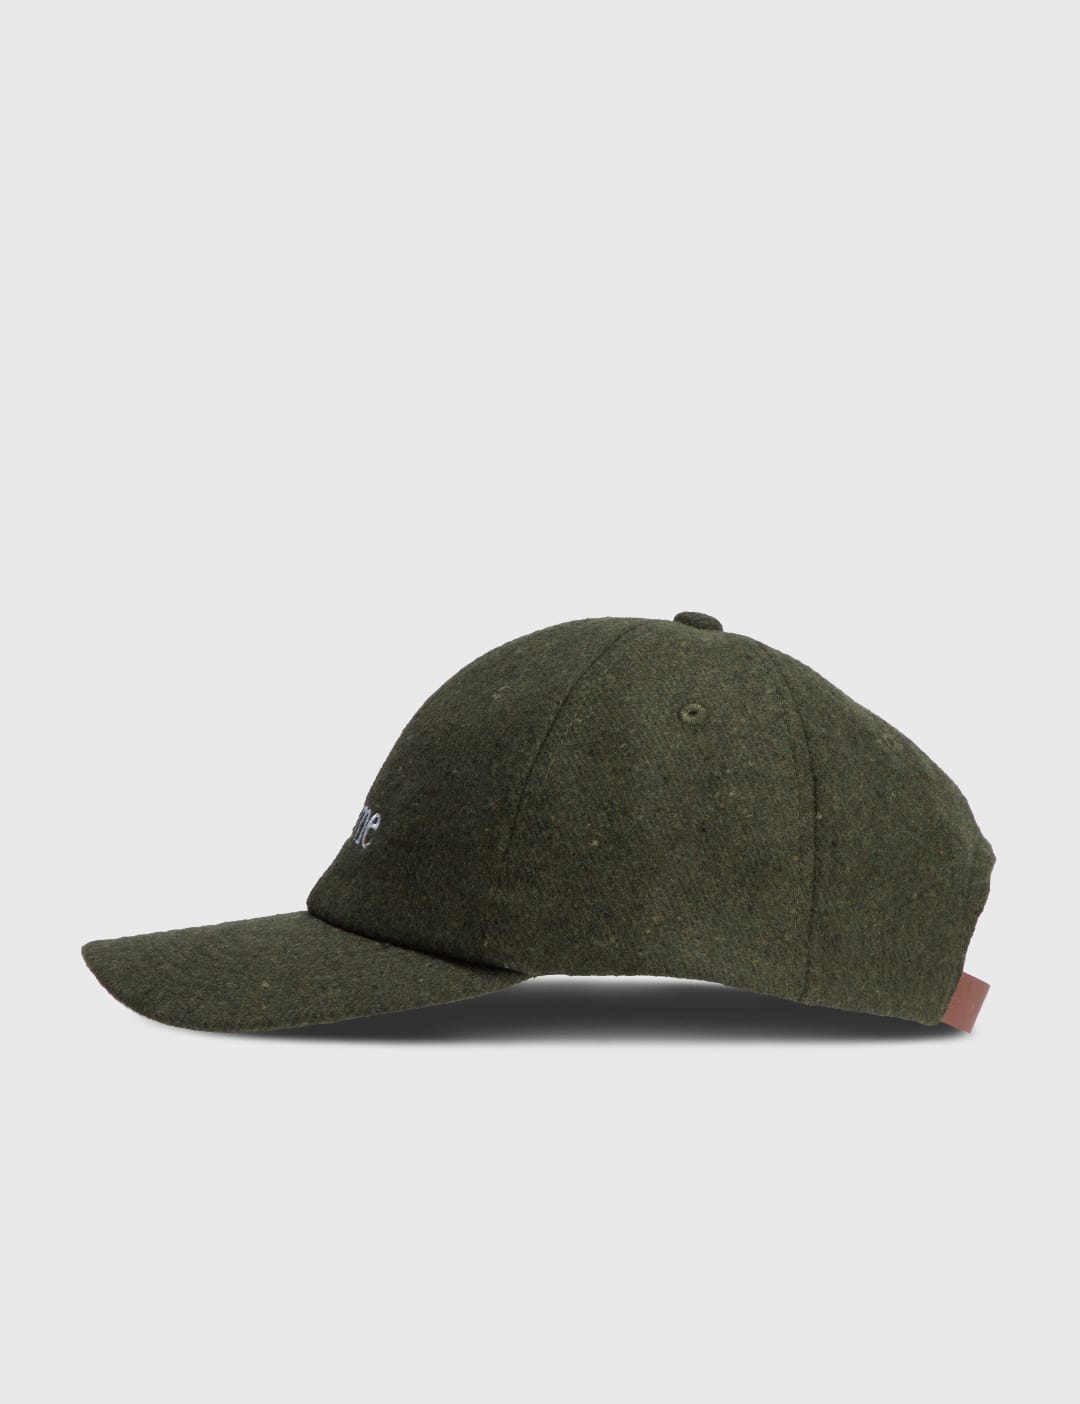 Dime - Classic Wool Cap | HBX - Globally Curated Fashion and 